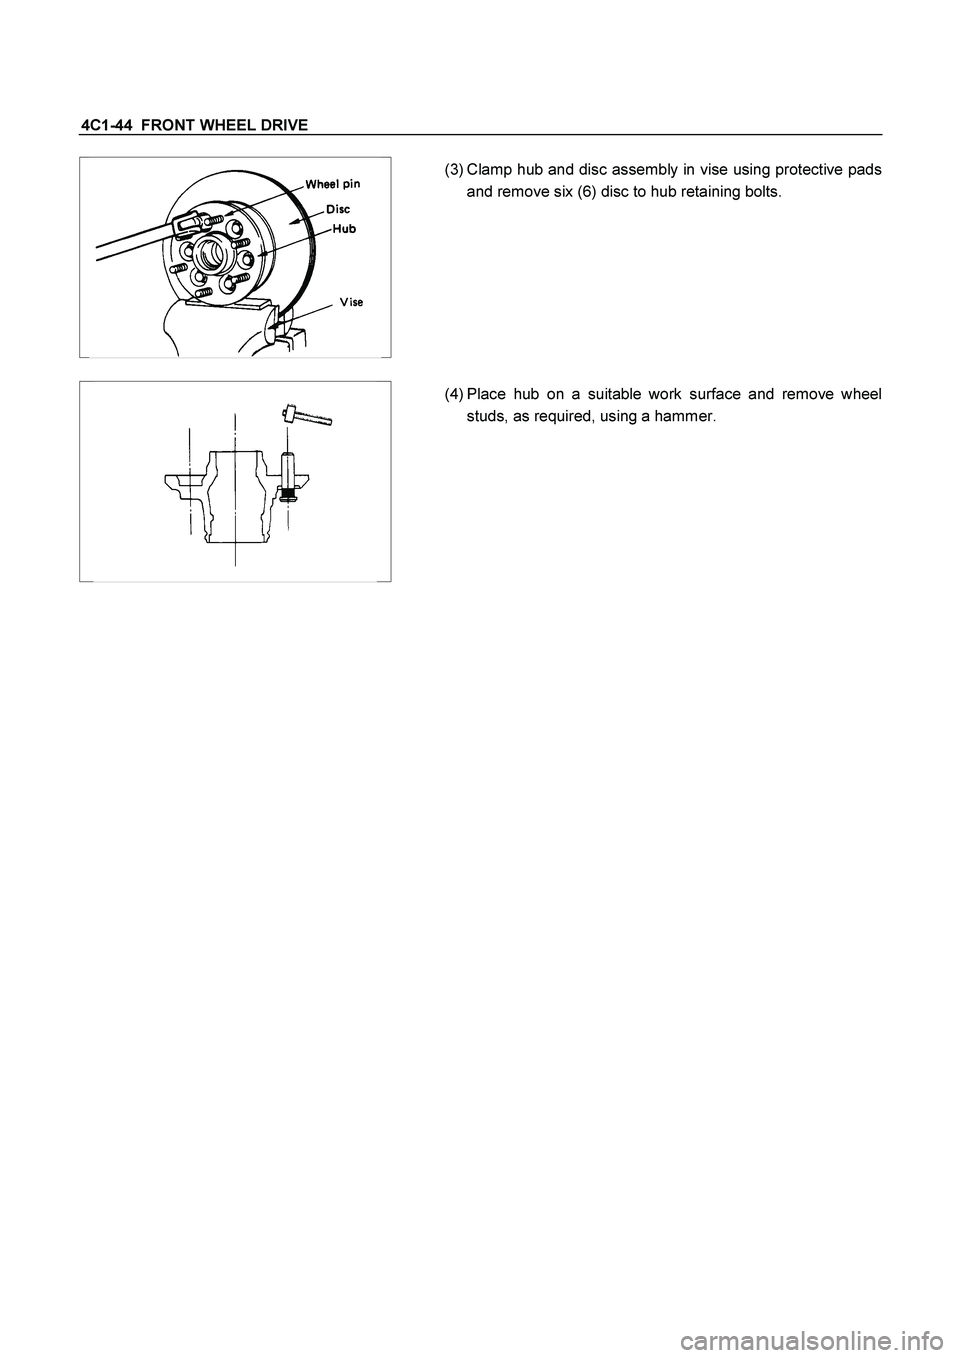 ISUZU TF SERIES 2004  Workshop Manual 4C1-44  FRONT WHEEL DRIVE 
  
 
 (3) Clamp hub and disc assembly in vise using protective pads
and remove six (6) disc to hub retaining bolts. 
 
  
 
 (4) Place hub on a suitable work surface and rem